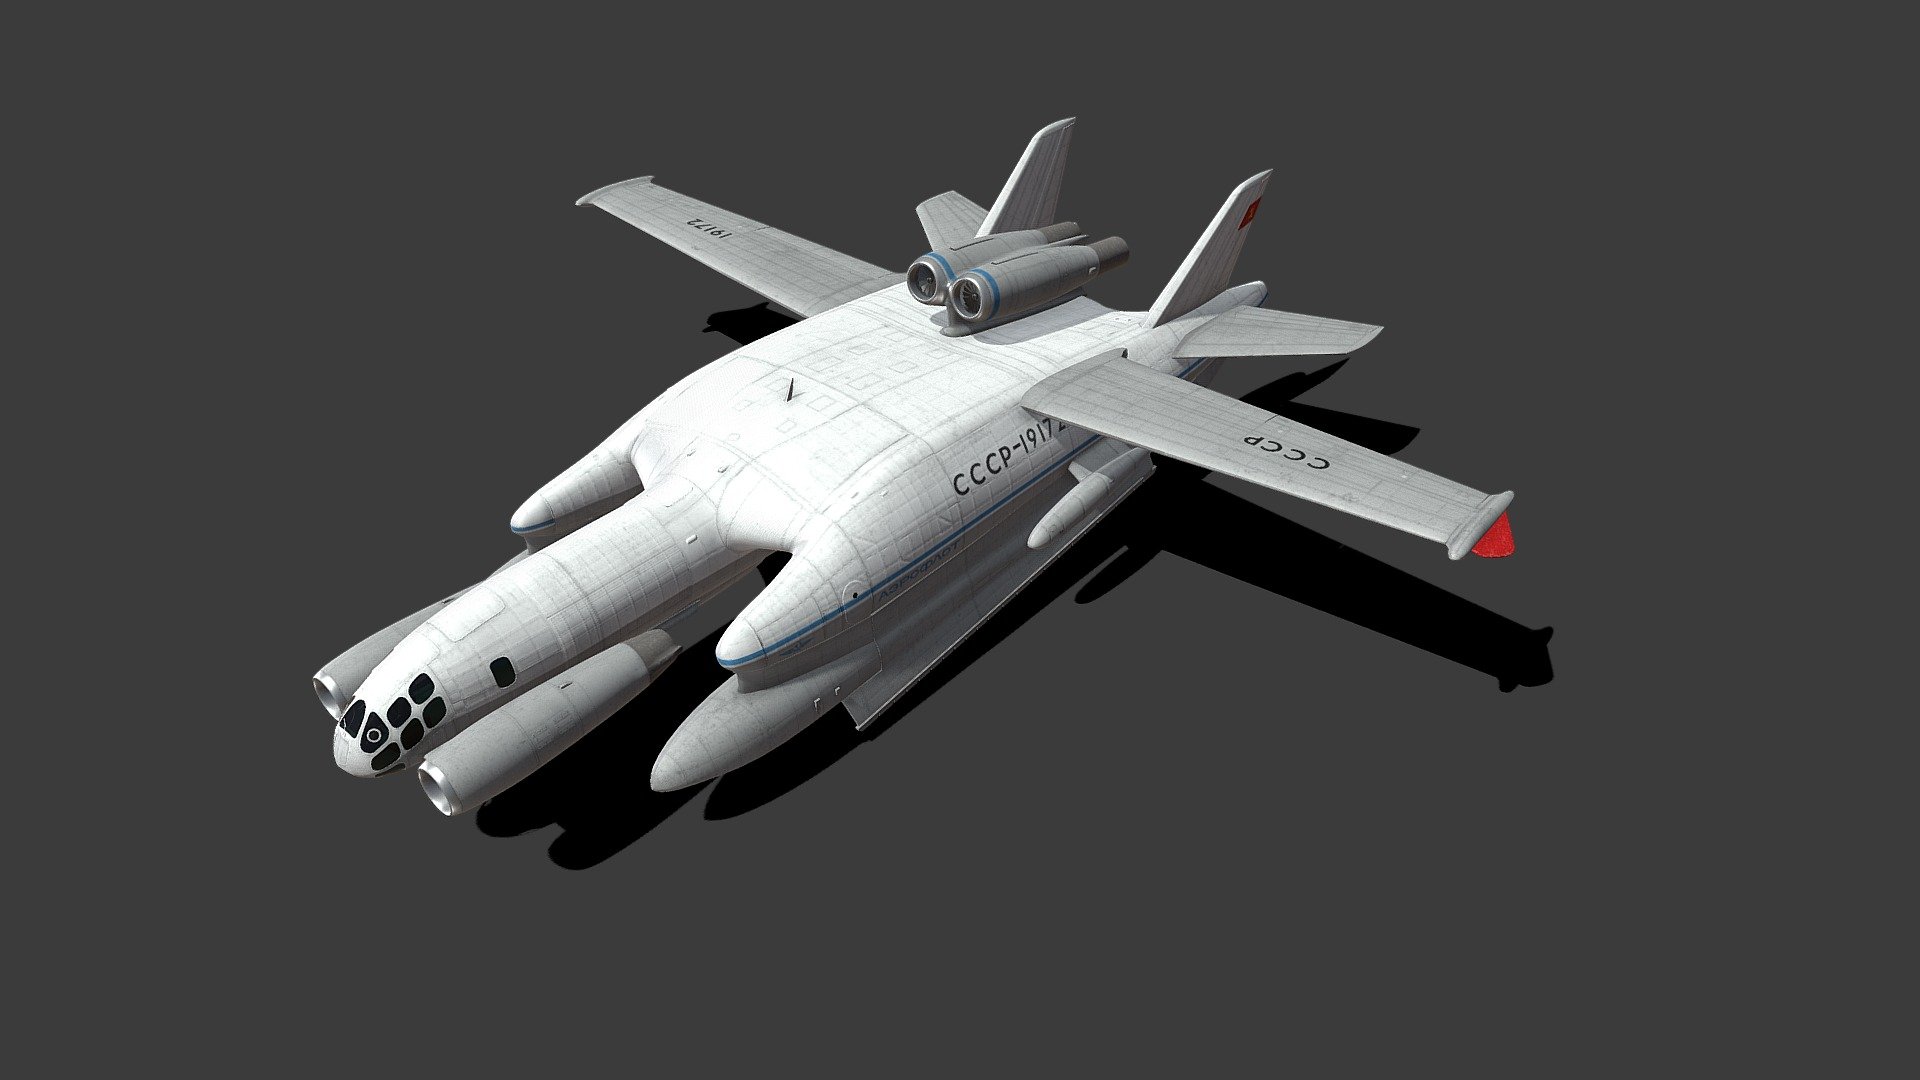 The Bartini Beriev VVA-14 Vertikaľno-Vzletayushchaya Amfibiya (vertical take-off amphibious aircraft) was a wing-in-ground-effect aircraft developed in the Soviet Union during the early 1970s. Designed to be able to take off from the water and fly at high speed over long distances, it was to make true flights at high altitude, but also have the capability of flying efficiently just above the sea surface, using aerodynamic ground effect. The VVA-14 was designed by Italian-born designer Robert Bartini in answer to a perceived requirement to destroy United States Navy Polaris missile submarines. The final aircraft was retired in 1987.

In the wake of the cancellation of the VSTOL engine configuration, the M1P  Version of the VVA-14 was equipped with rigid pontoons, an extended fuselage, and an extra pair of engines in the nose in an attempt to make the aircraft viable.

Note: Model includes rigid pontoons and undercarriage 3d model